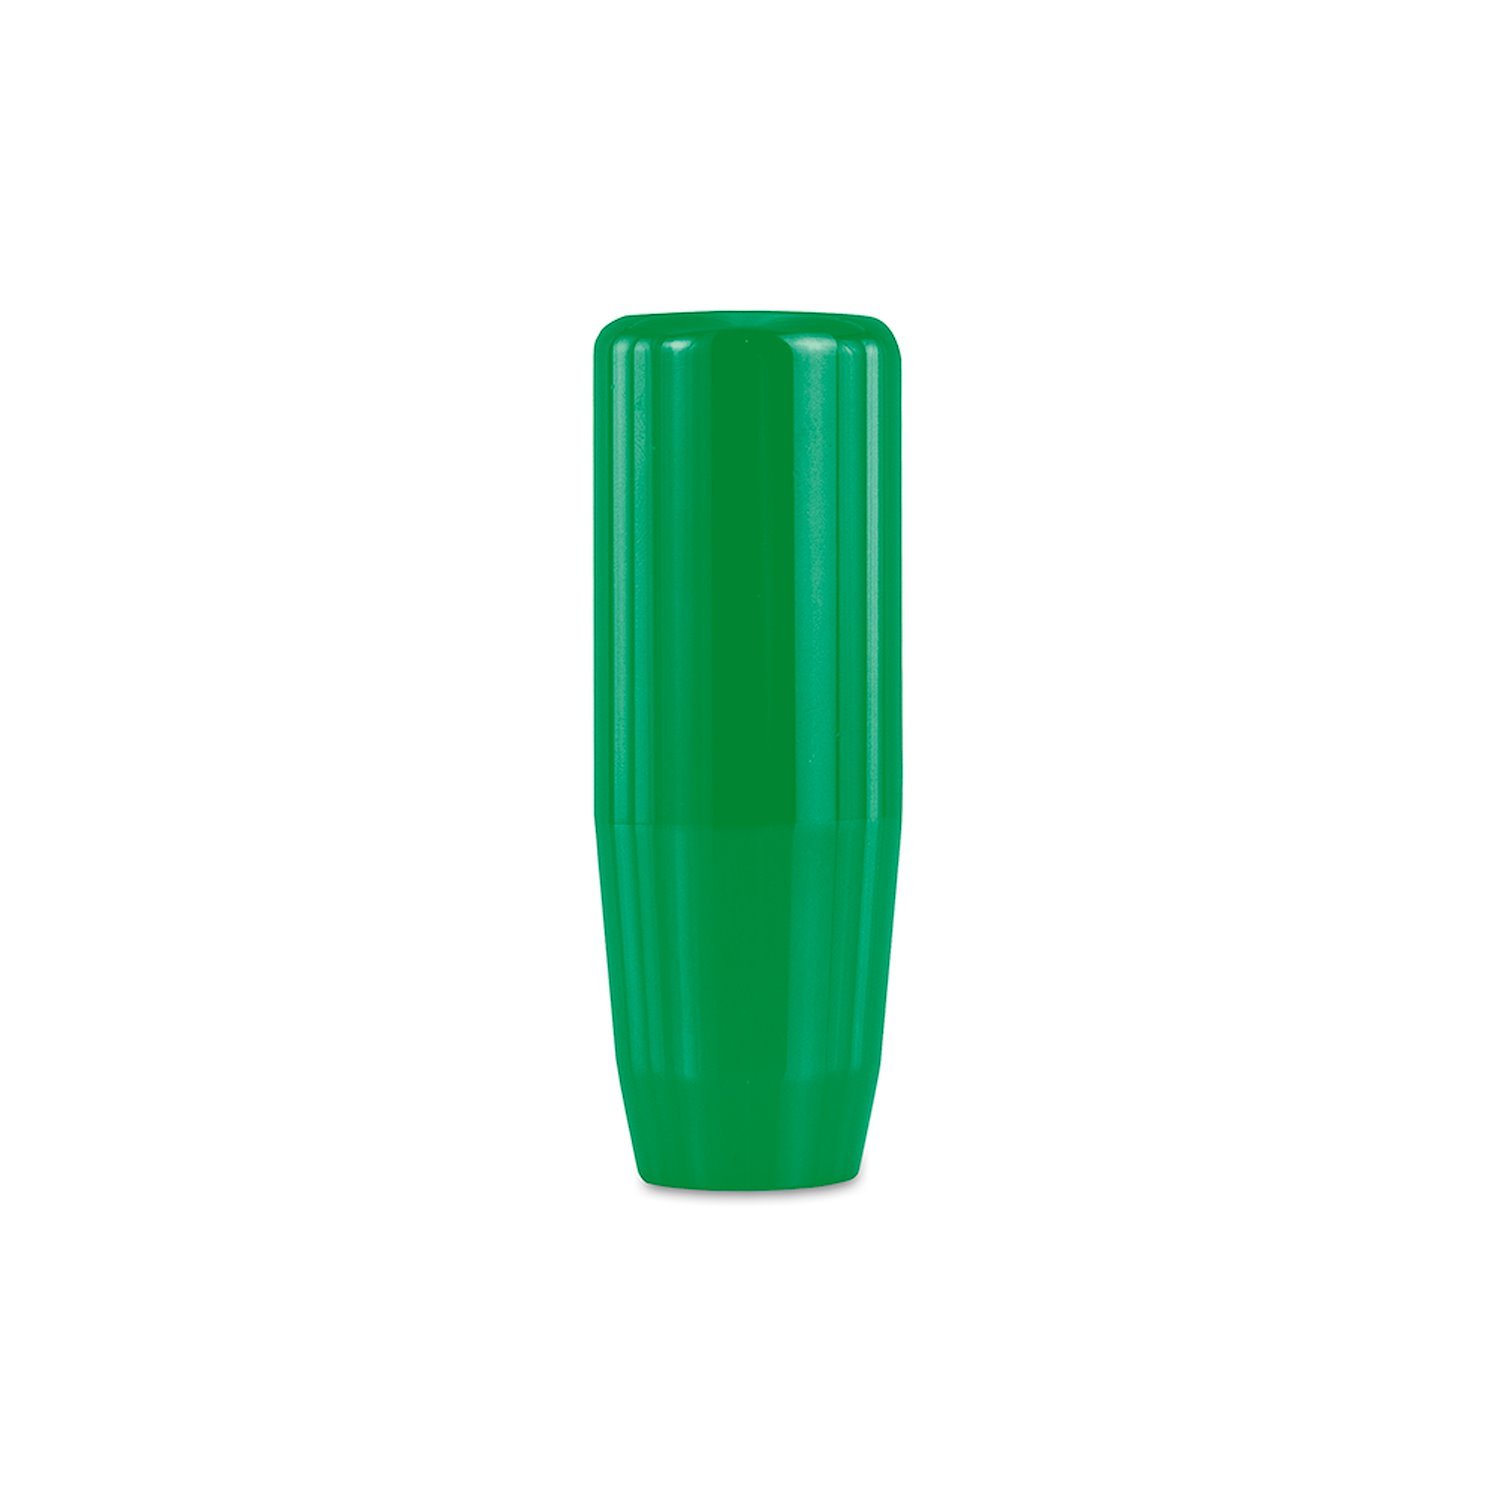 WEIGHTED SHIFT KNOB GREEN